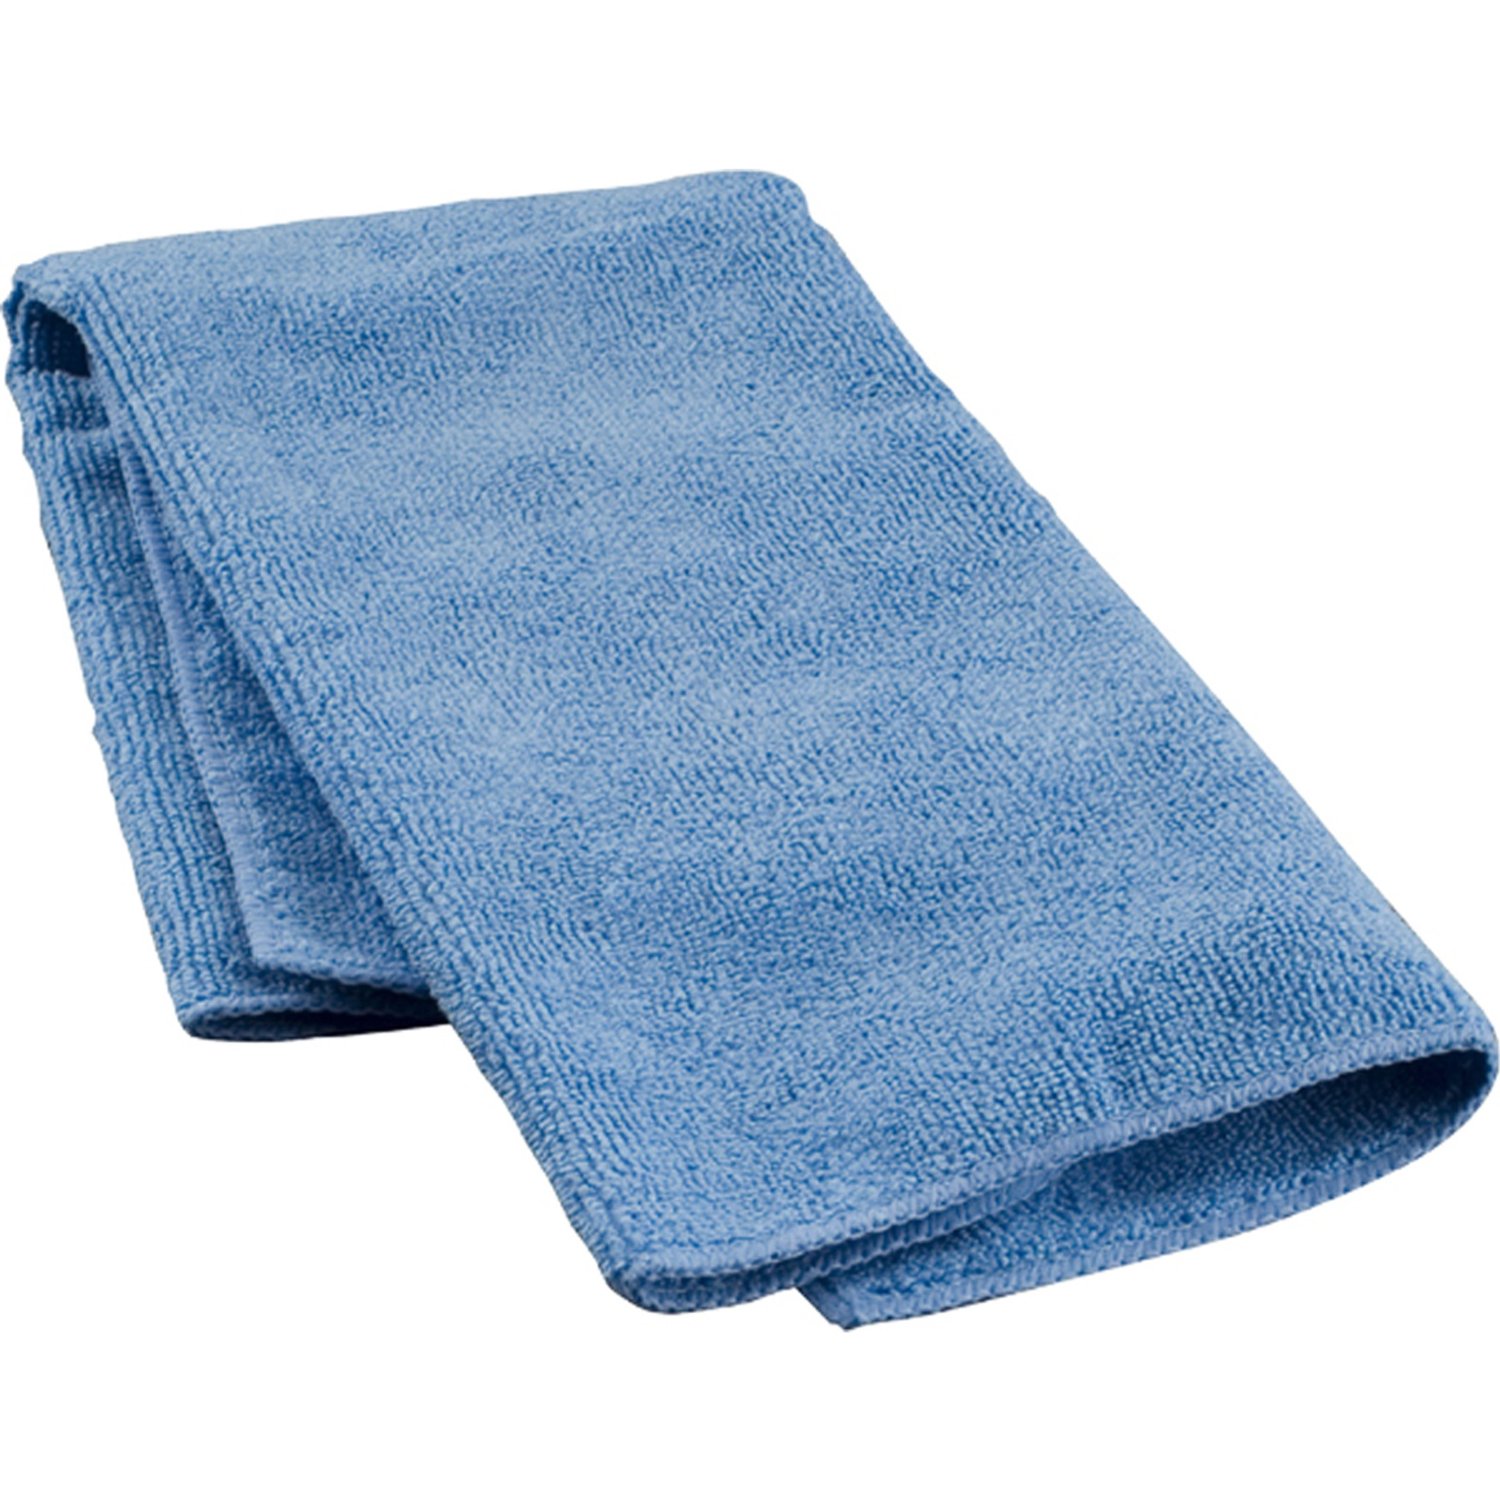 Top 10 Best Microfiber Cleaning Cloths 2017 Top Value Reviews